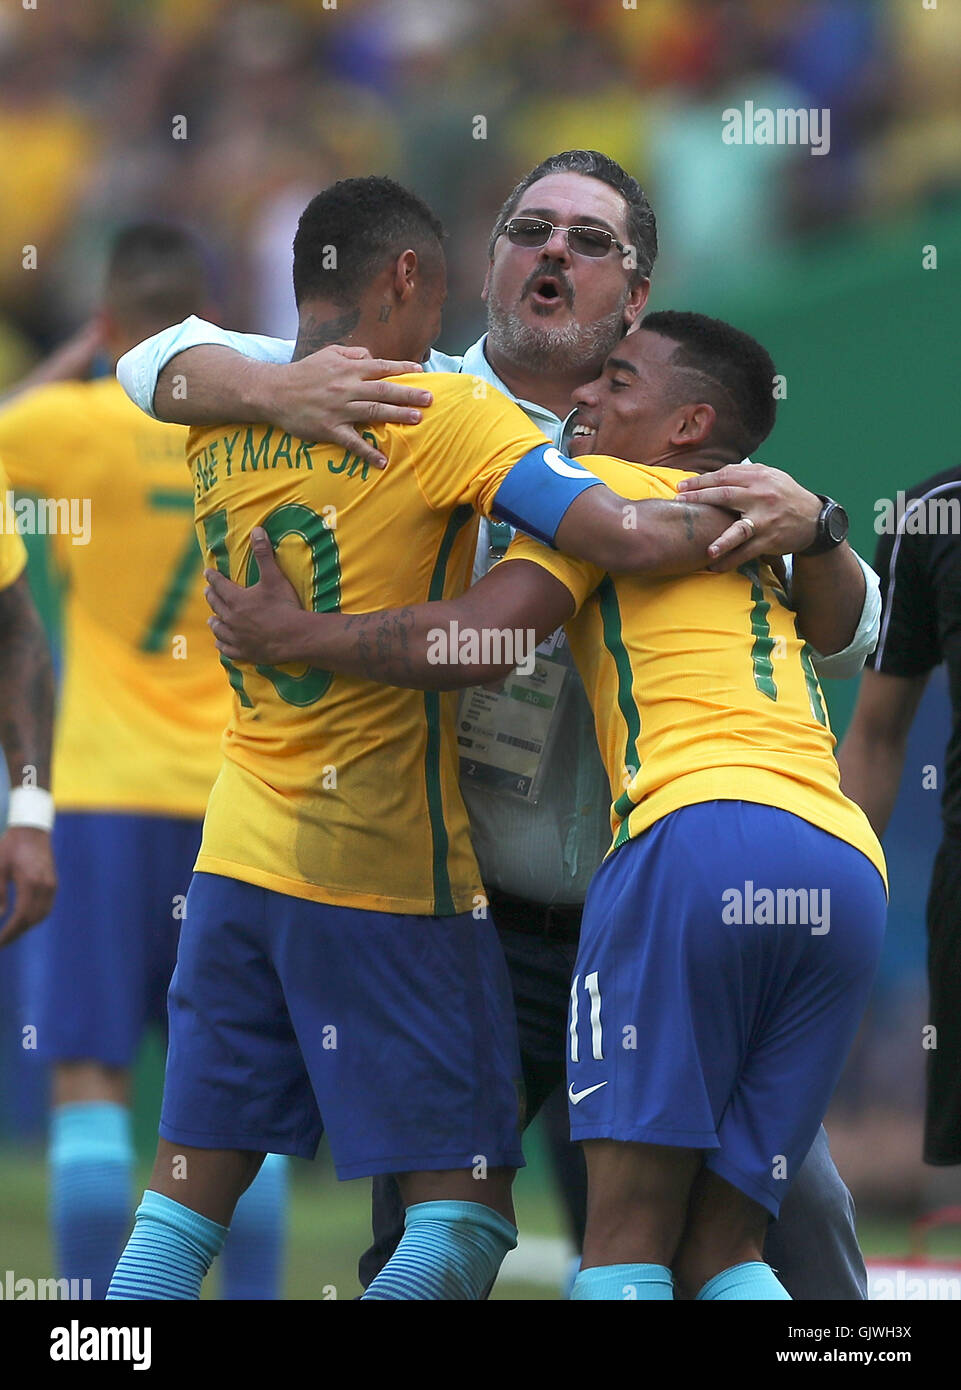 Rio De Janeiro, Brazil. 17th Aug, 2016. Brazil's Neymar (L) and Jesus Gabriel (R) celebrate with their coach during the men's football semifinal between Brazil and Honduras at the 2016 Rio Olympic Games in Rio de Janeiro, Brazil, on Aug. 17, 2016. Brazil won the match with 6:0. Credit:  Cao Can/Xinhua/Alamy Live News Stock Photo